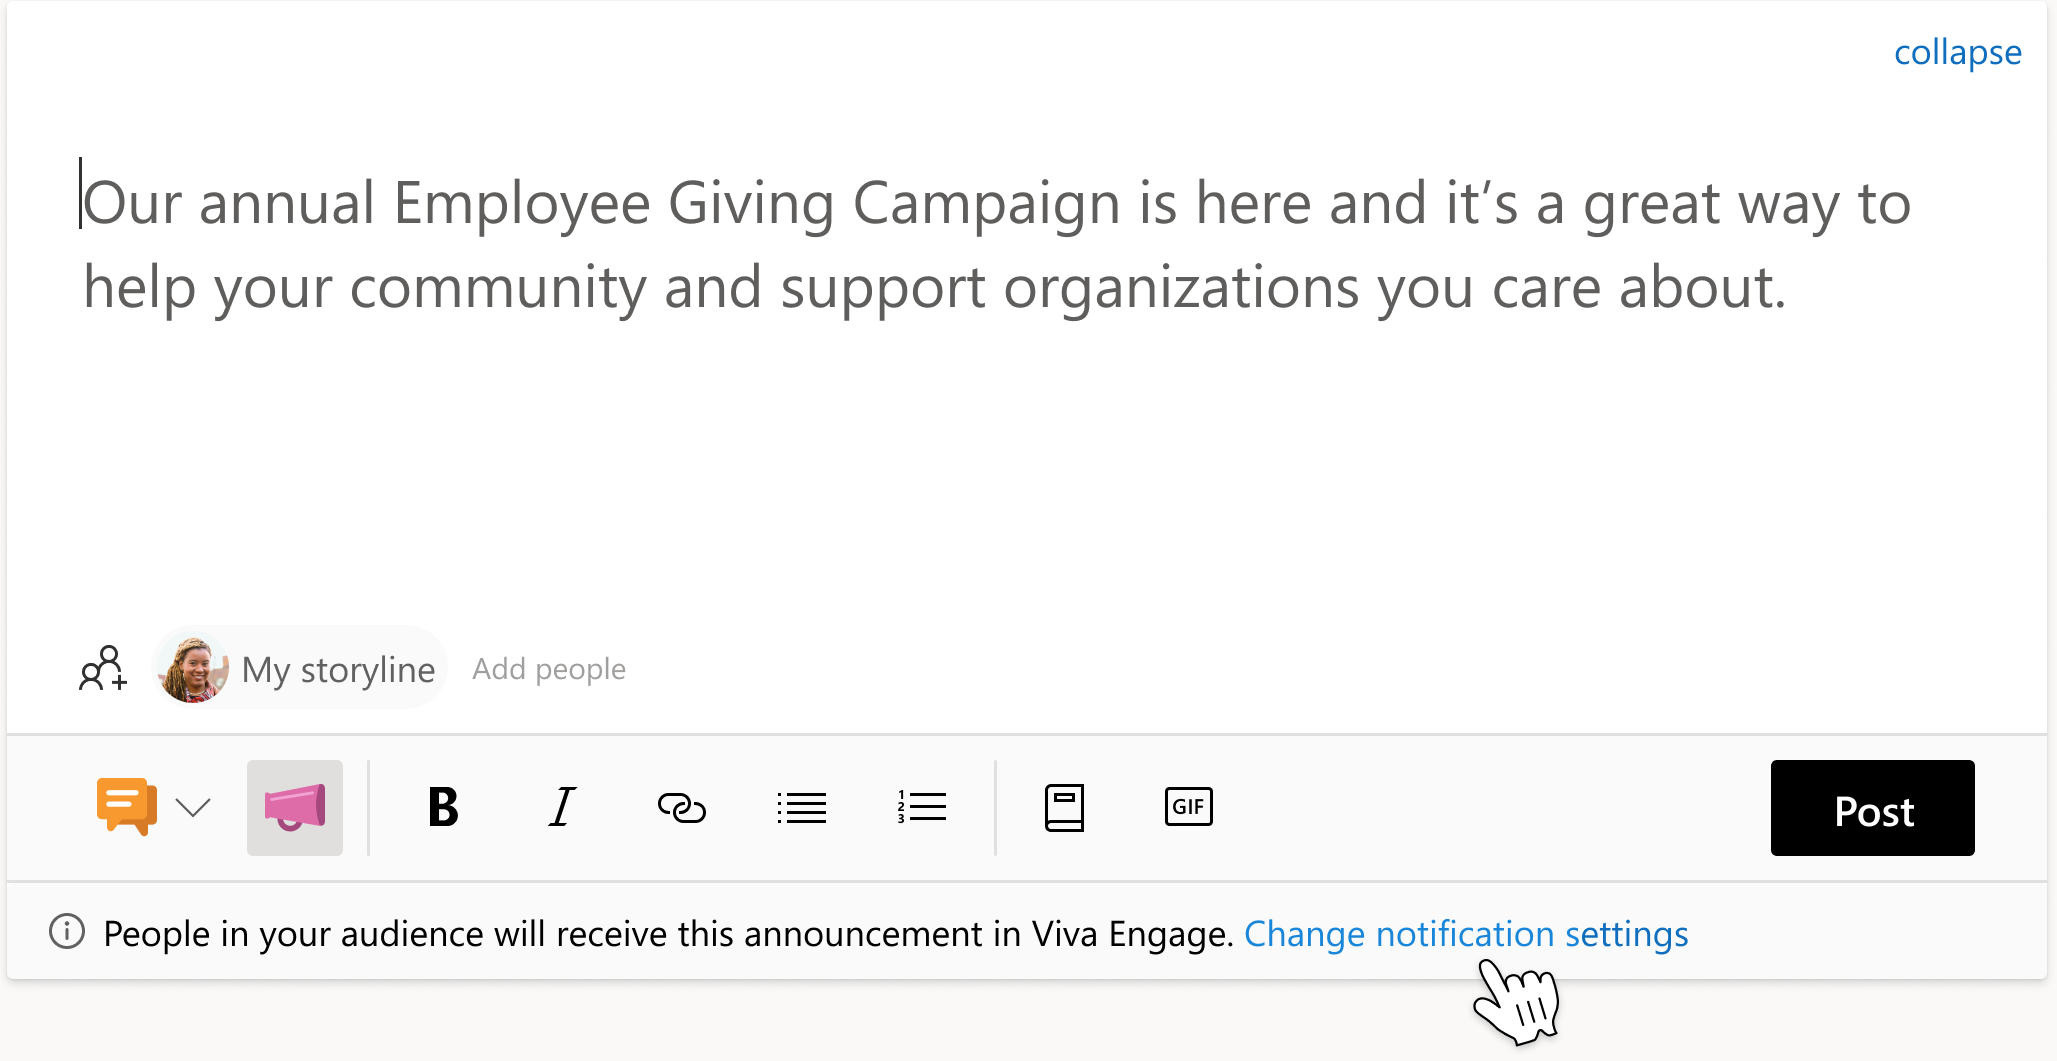 Image of the interface for changing your storyline announcement settings in Viva Engage